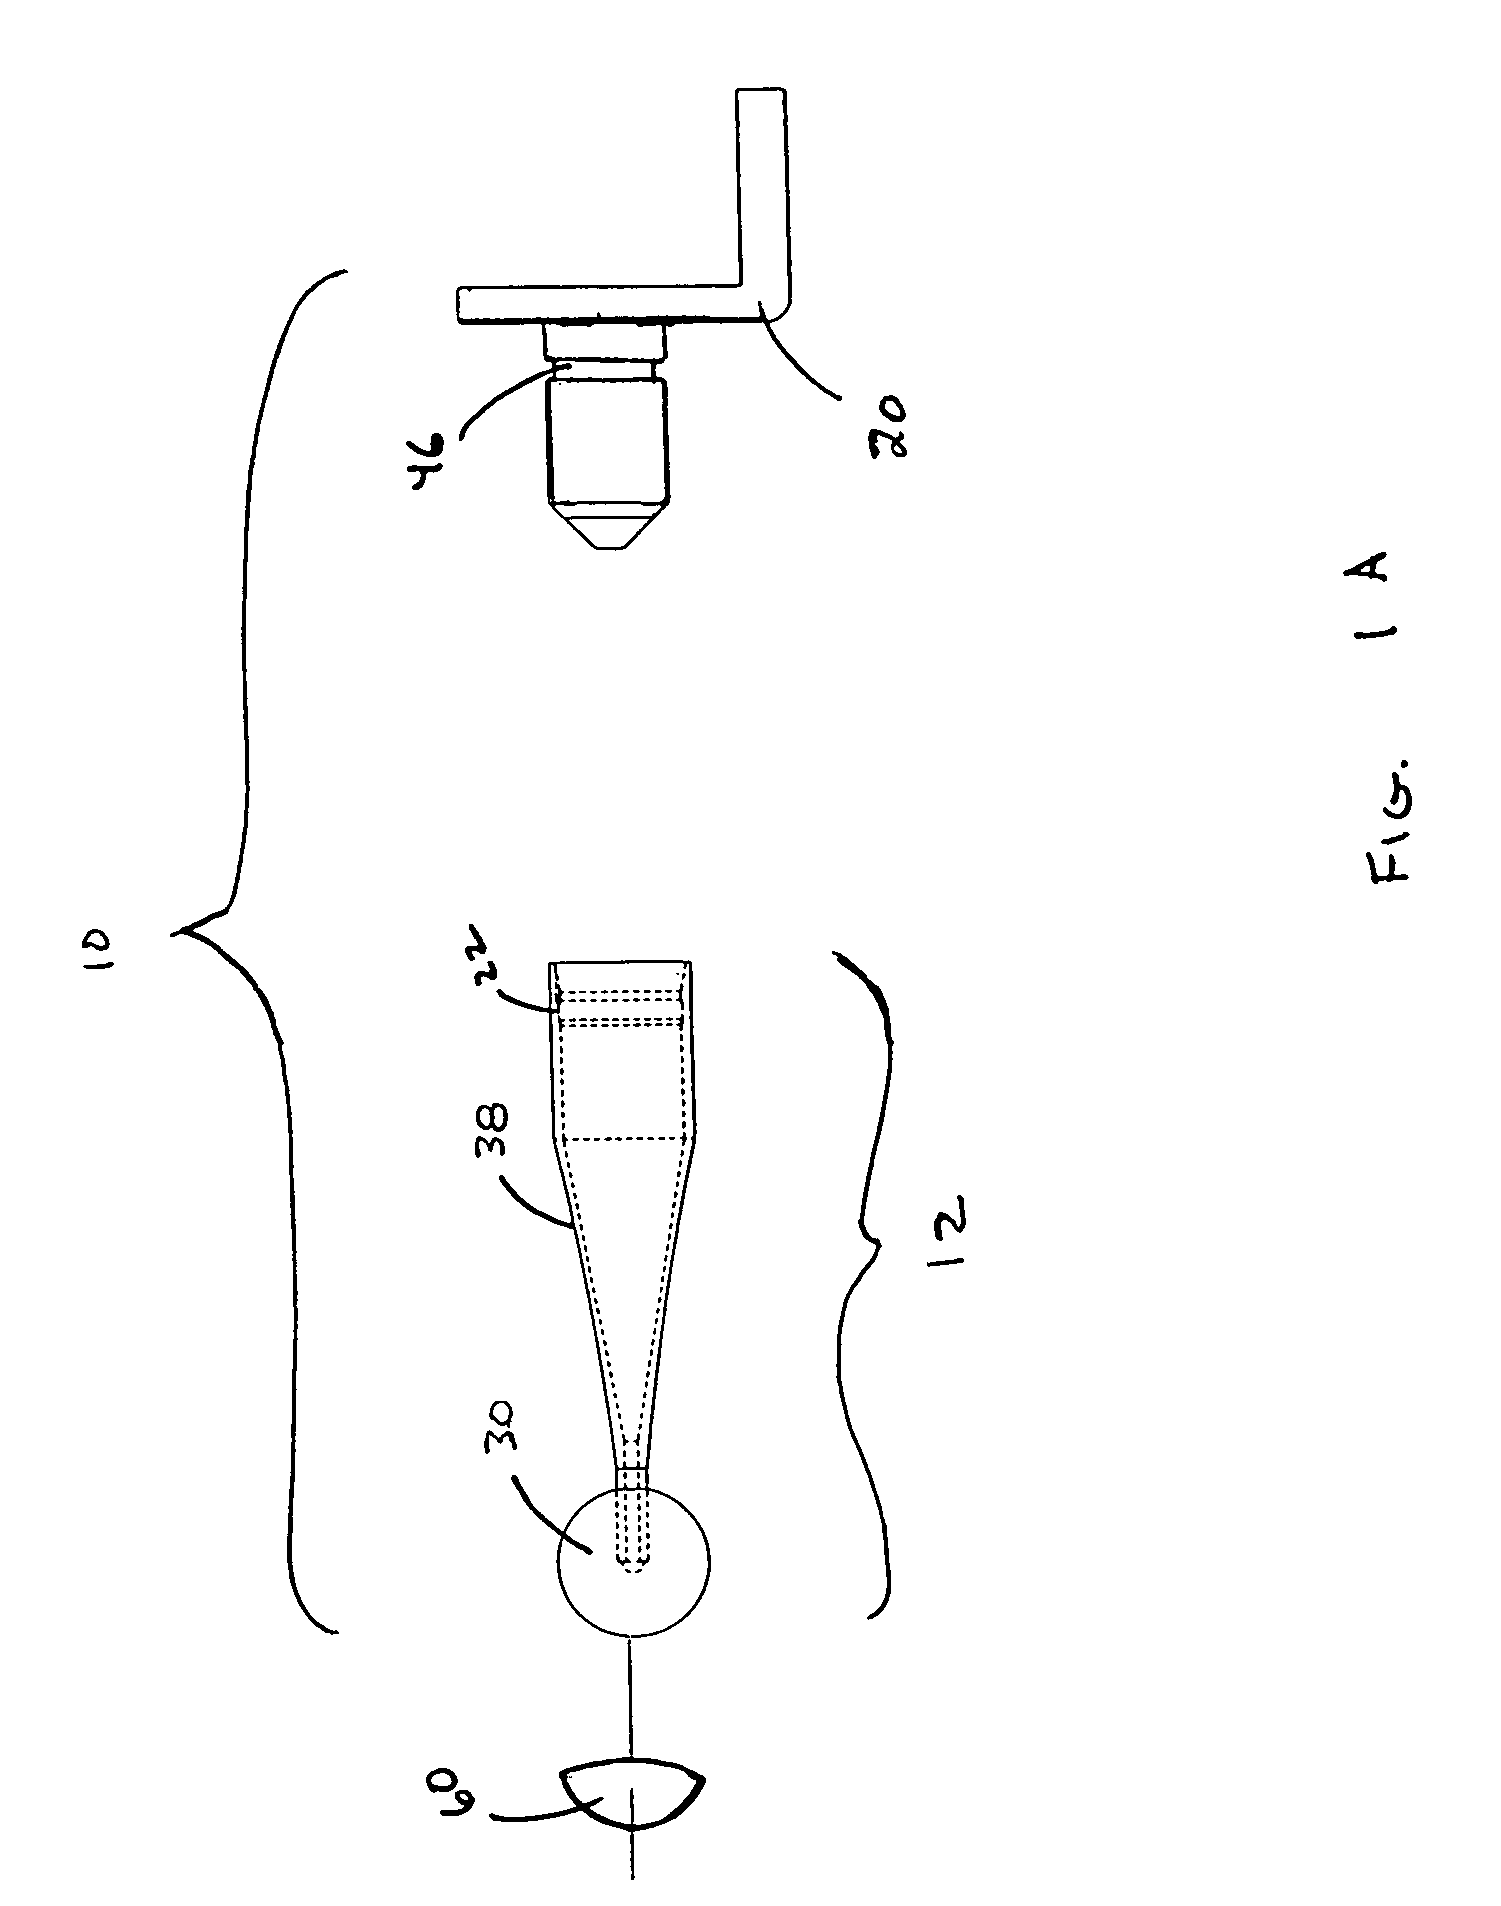 Shaped biocompatible radiation shield and method for making same